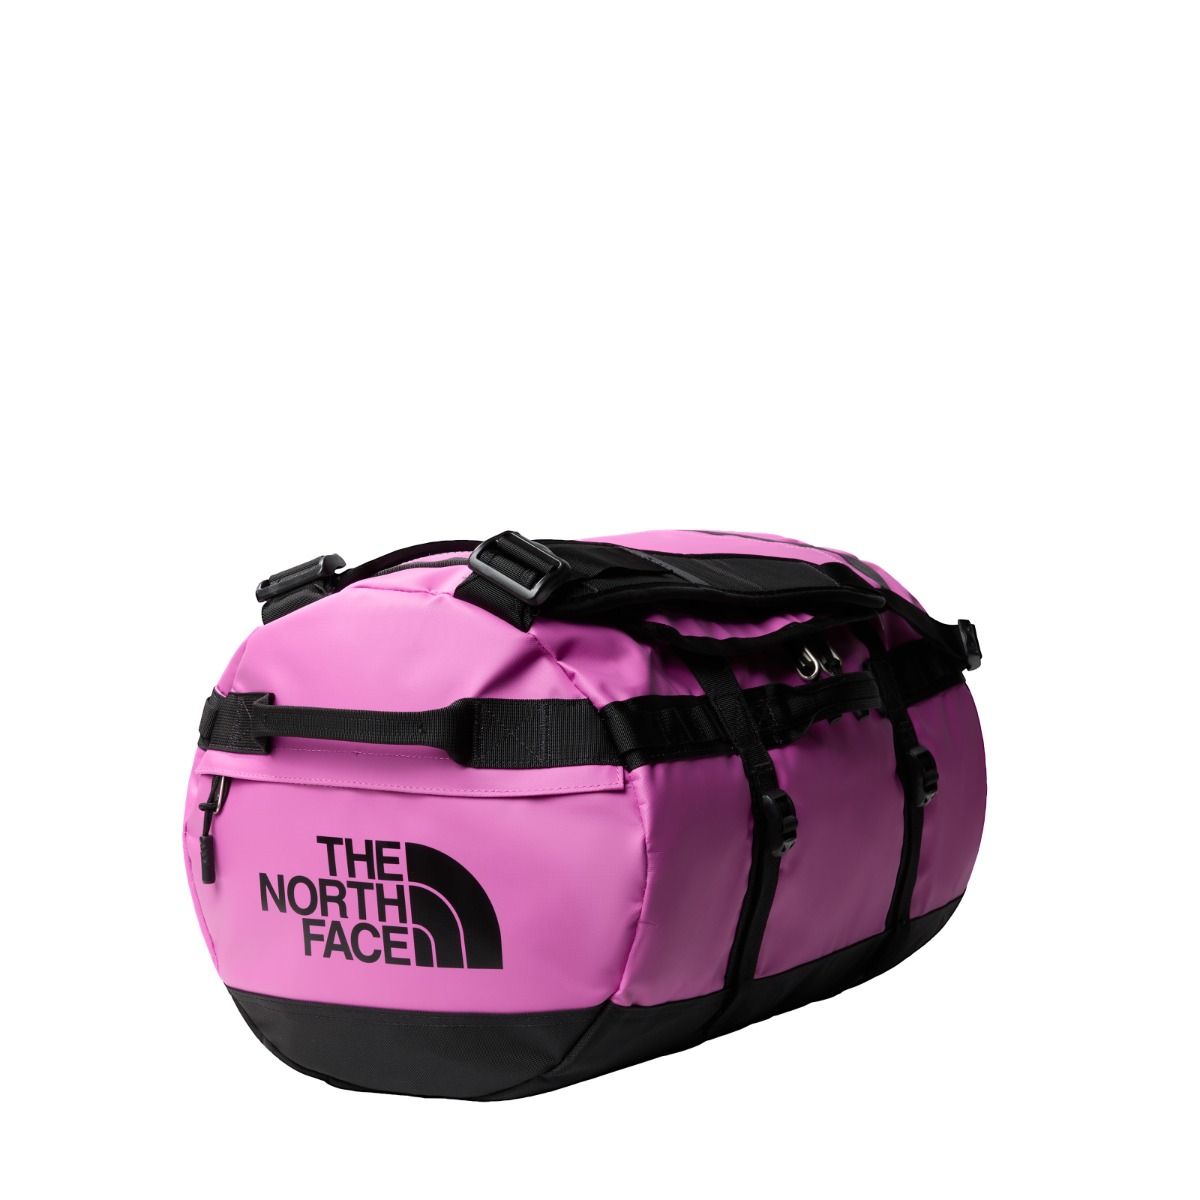 The North Face - BASE CAMP DUFFEL SMALL 50L